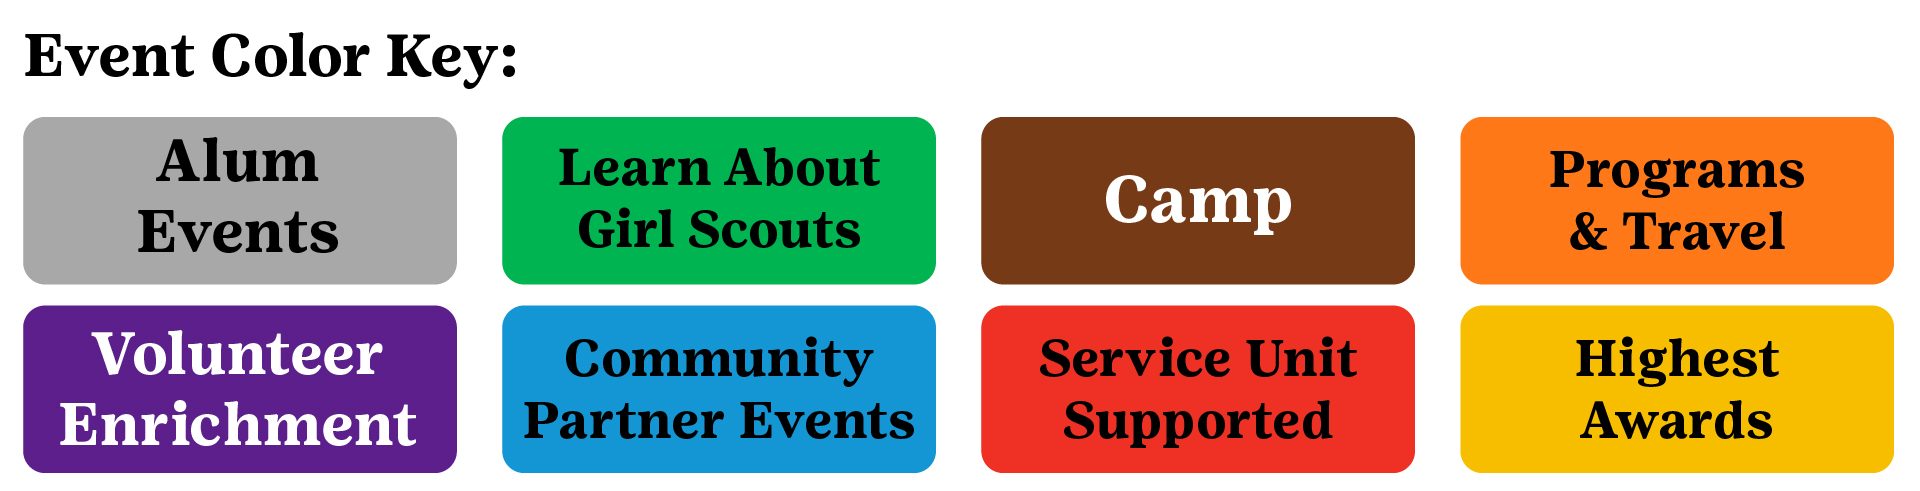 event color key - alum events gray, volunteer enrichment purple, learn about girl scouts green, community partner events blue, camp brown, service unit supported red, programs and travel orange, highest awards yellow